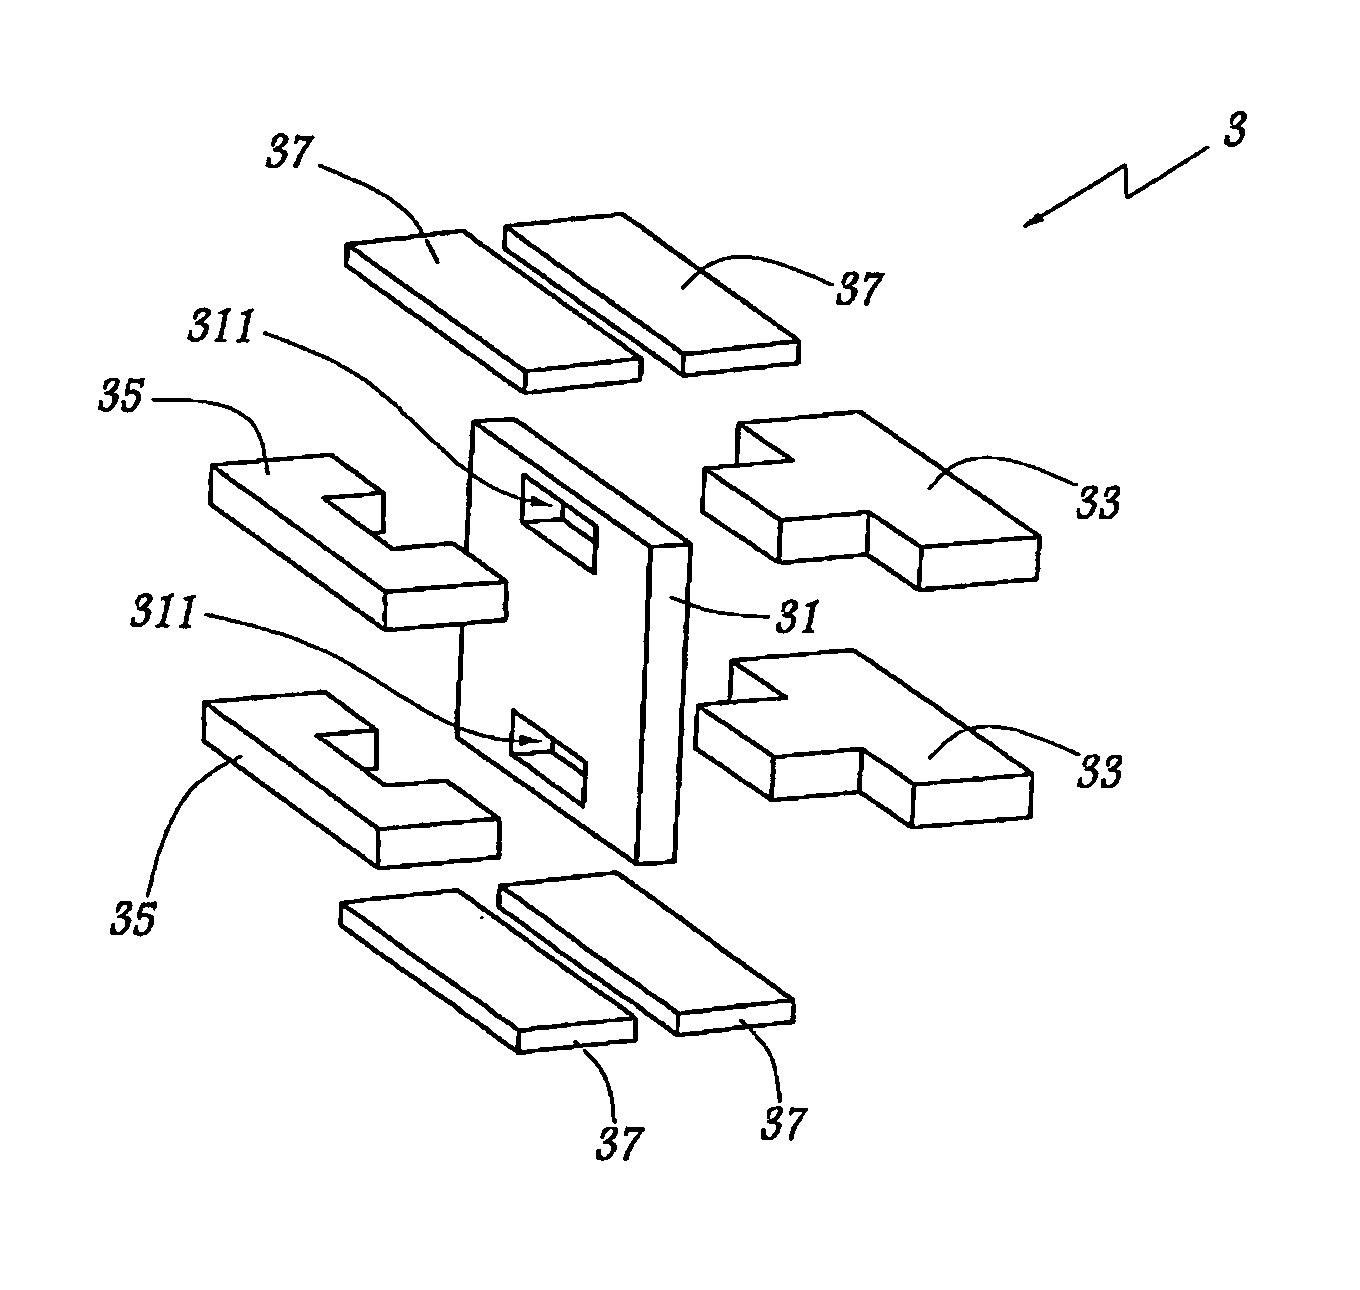 Composite structural part formed of multiple layer fibrous preforms inter-fitted with one another and reinforced with a polymer matrix coating